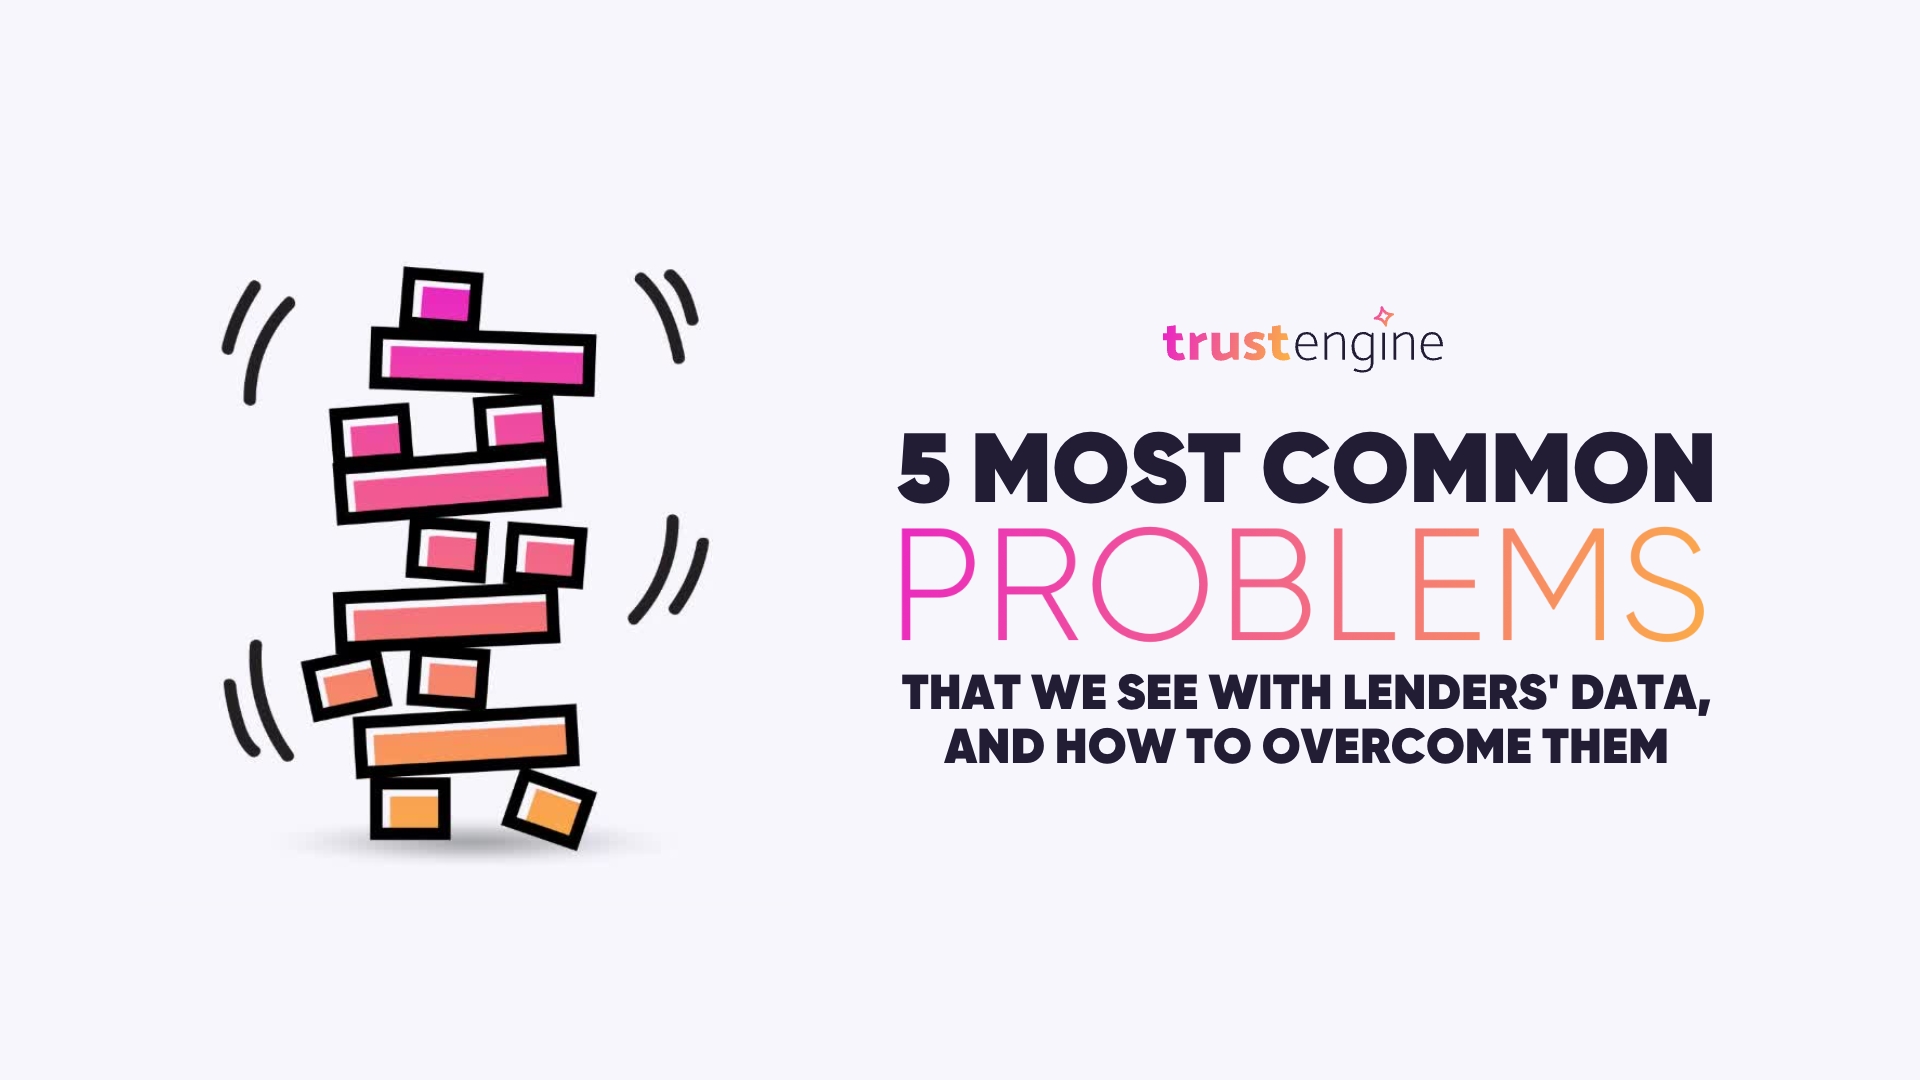 The Five Most Common Problems that We See With Lenders’ Data, and How to Overcome Them